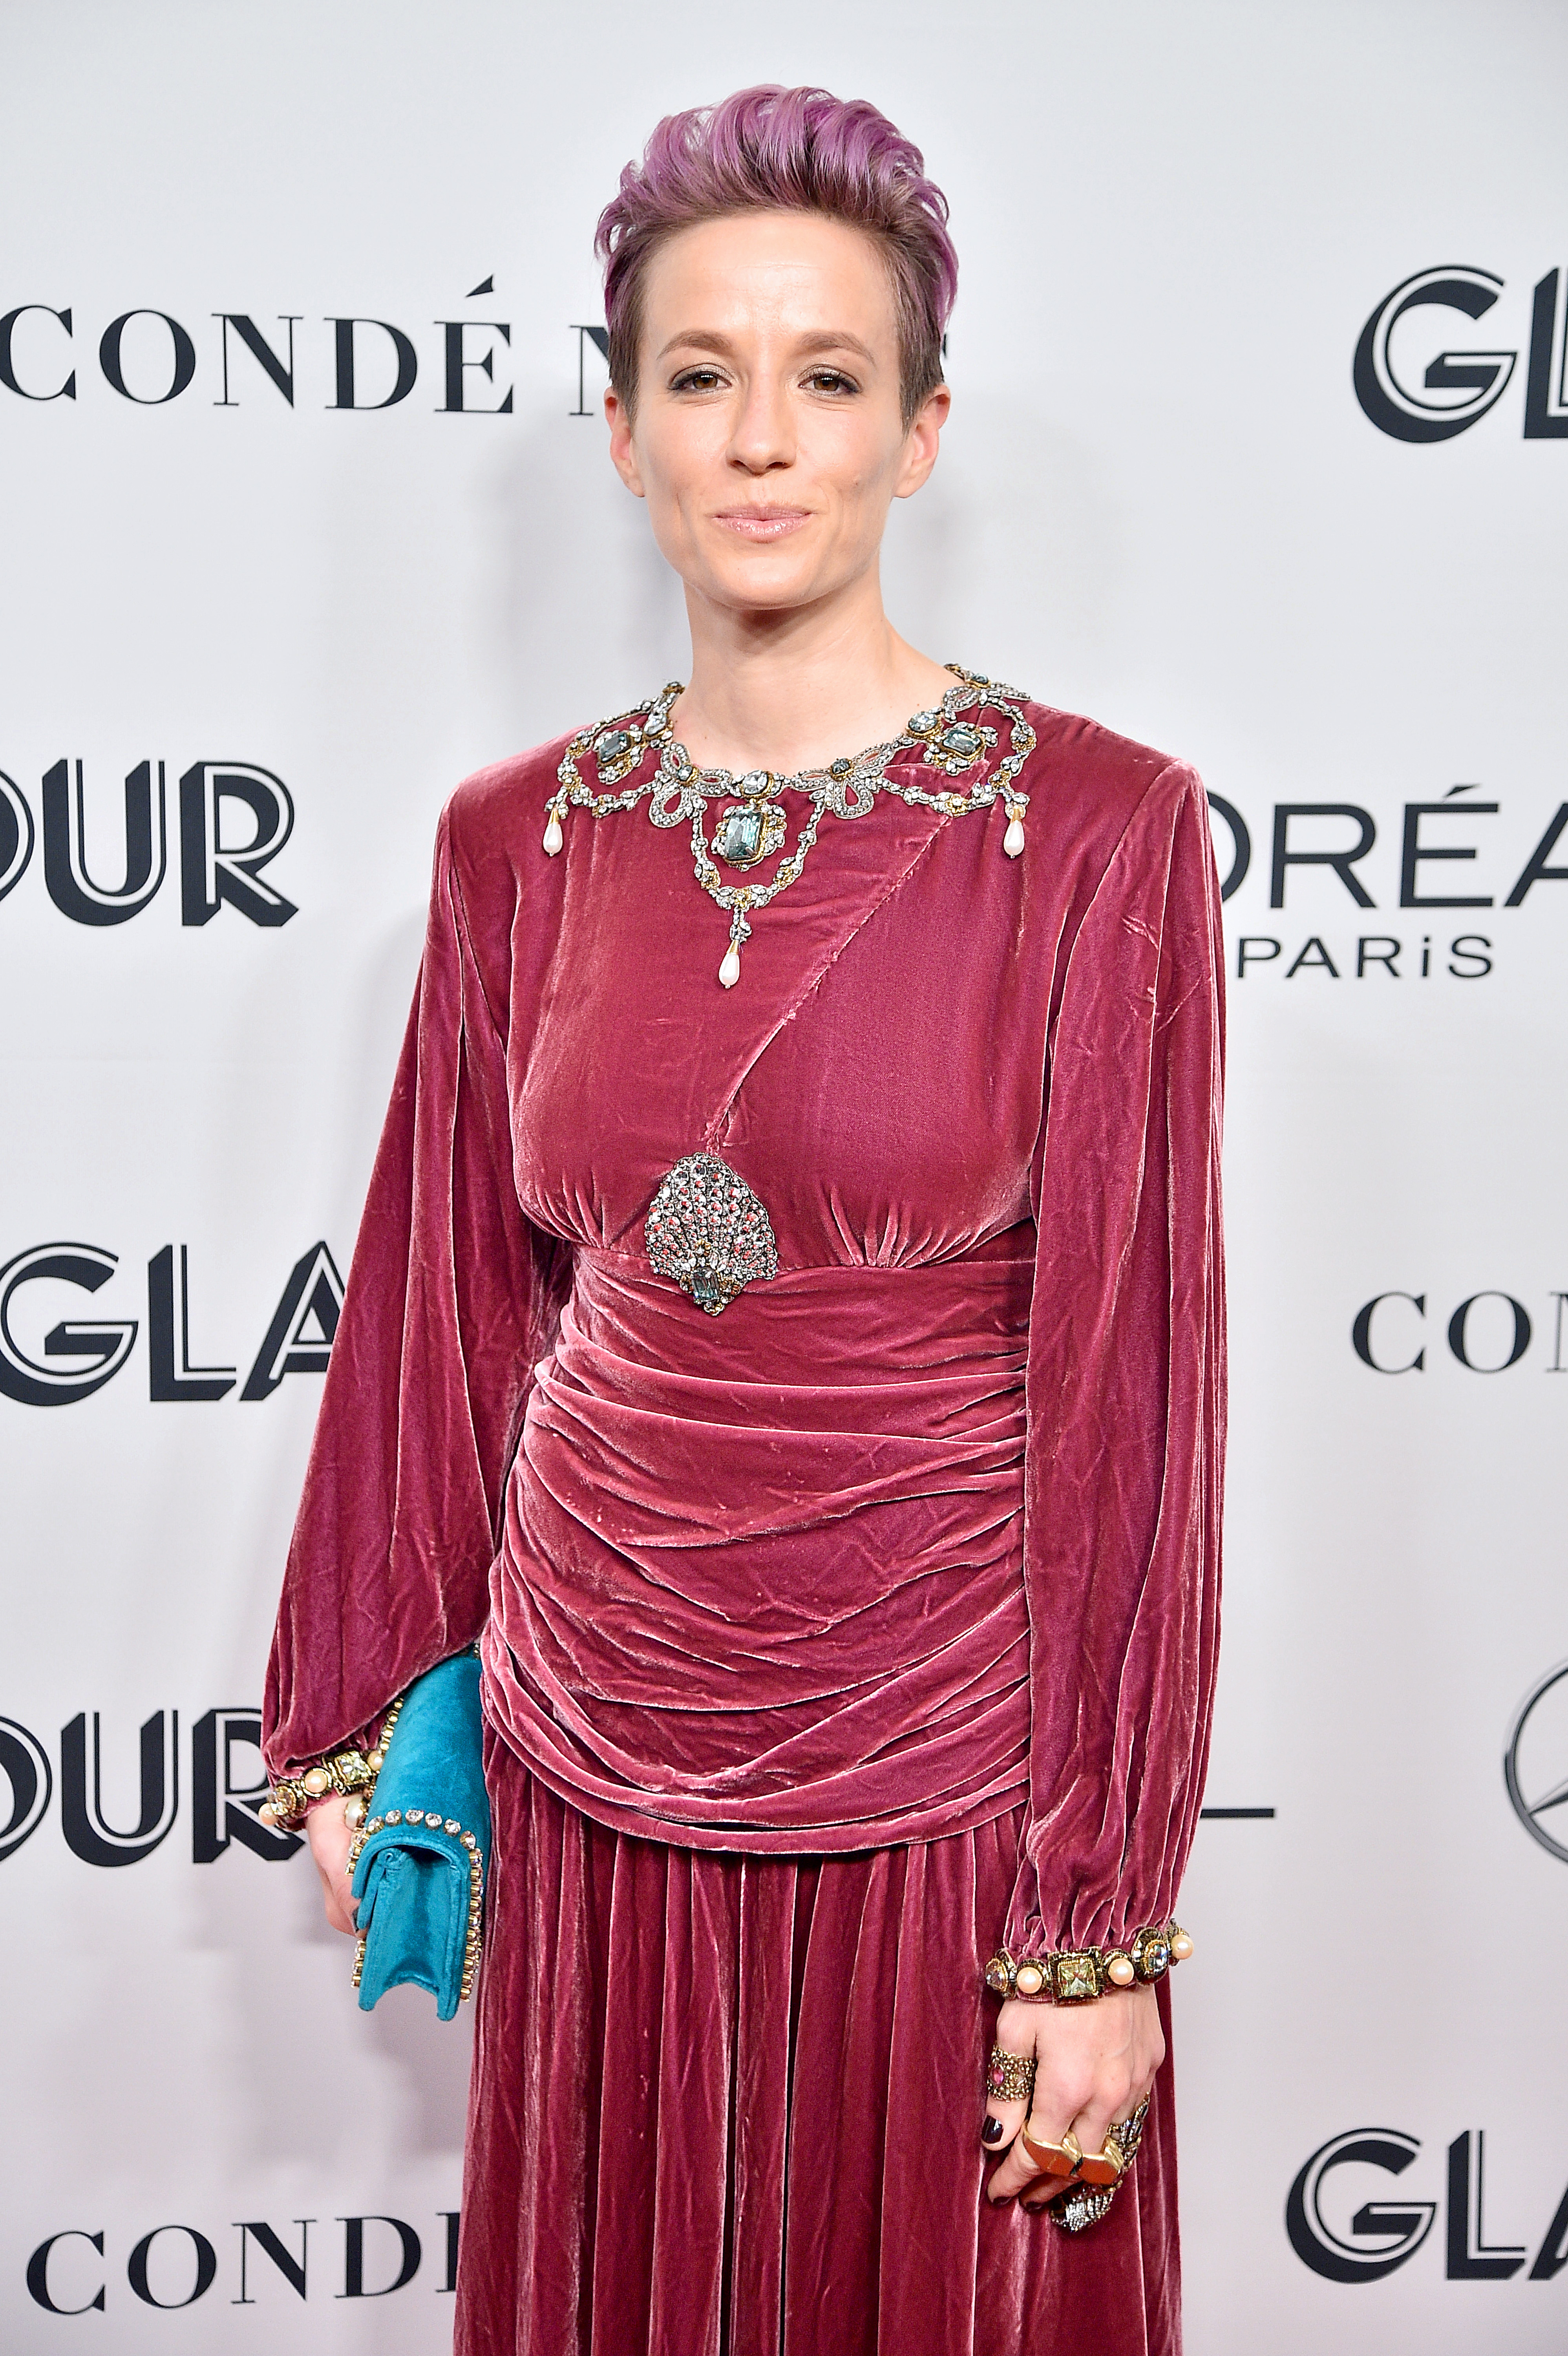 Megan Rapinoe at the Glamour Women of The Year Awards on November 11, 2019, in New York City | Source: Getty Images